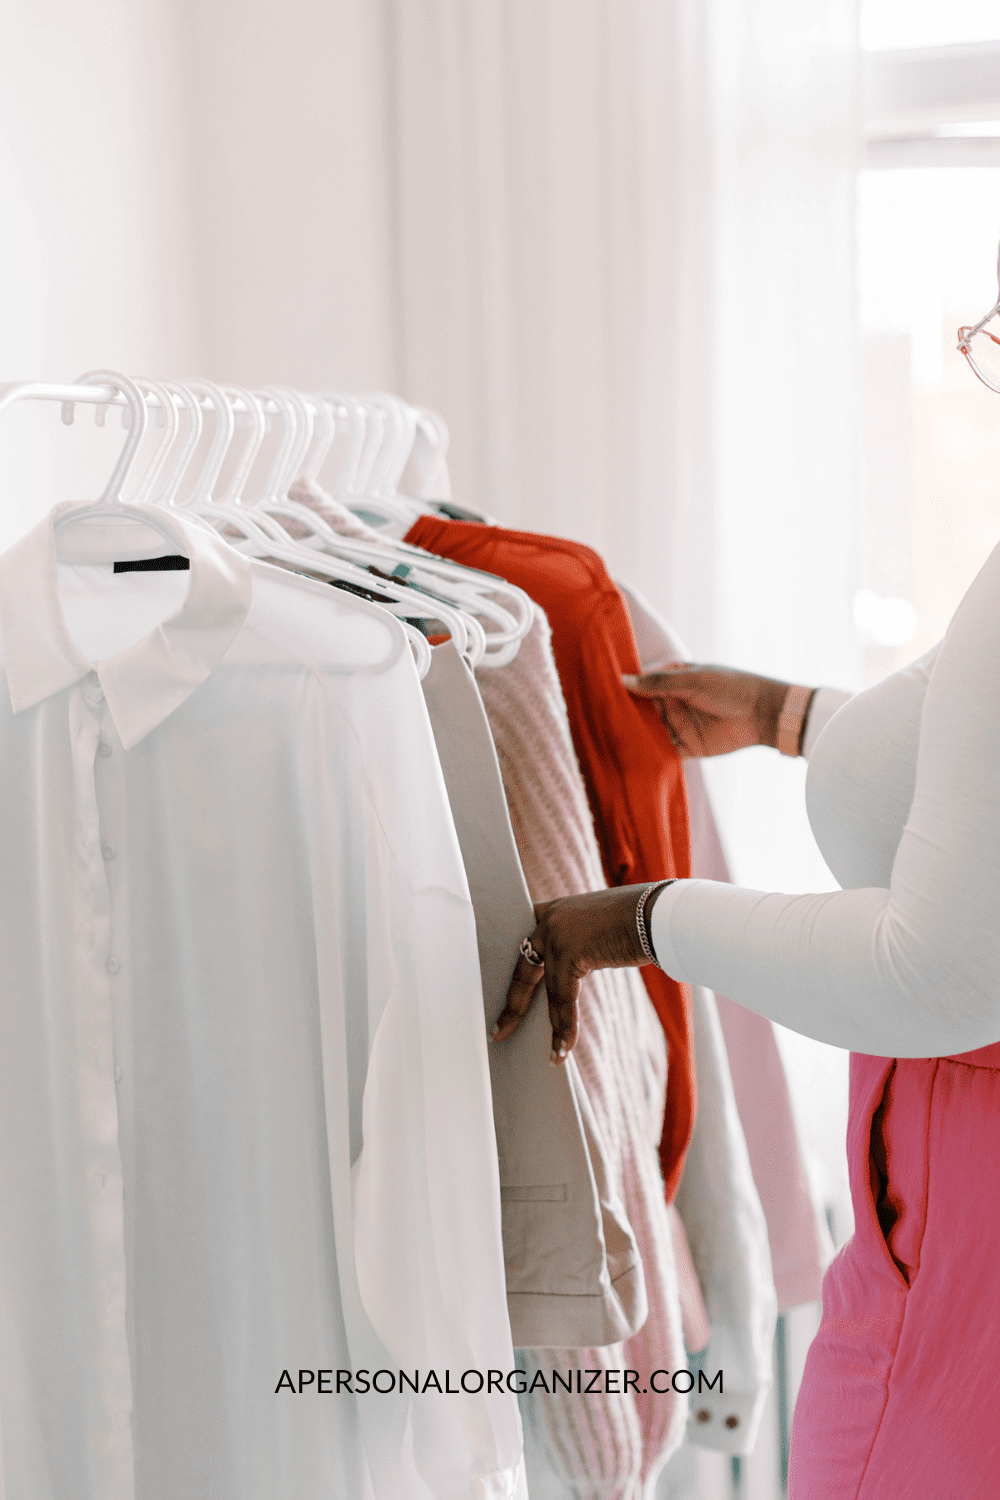 Essential Steps to Buil Your Perfect Capsule Wardrobe